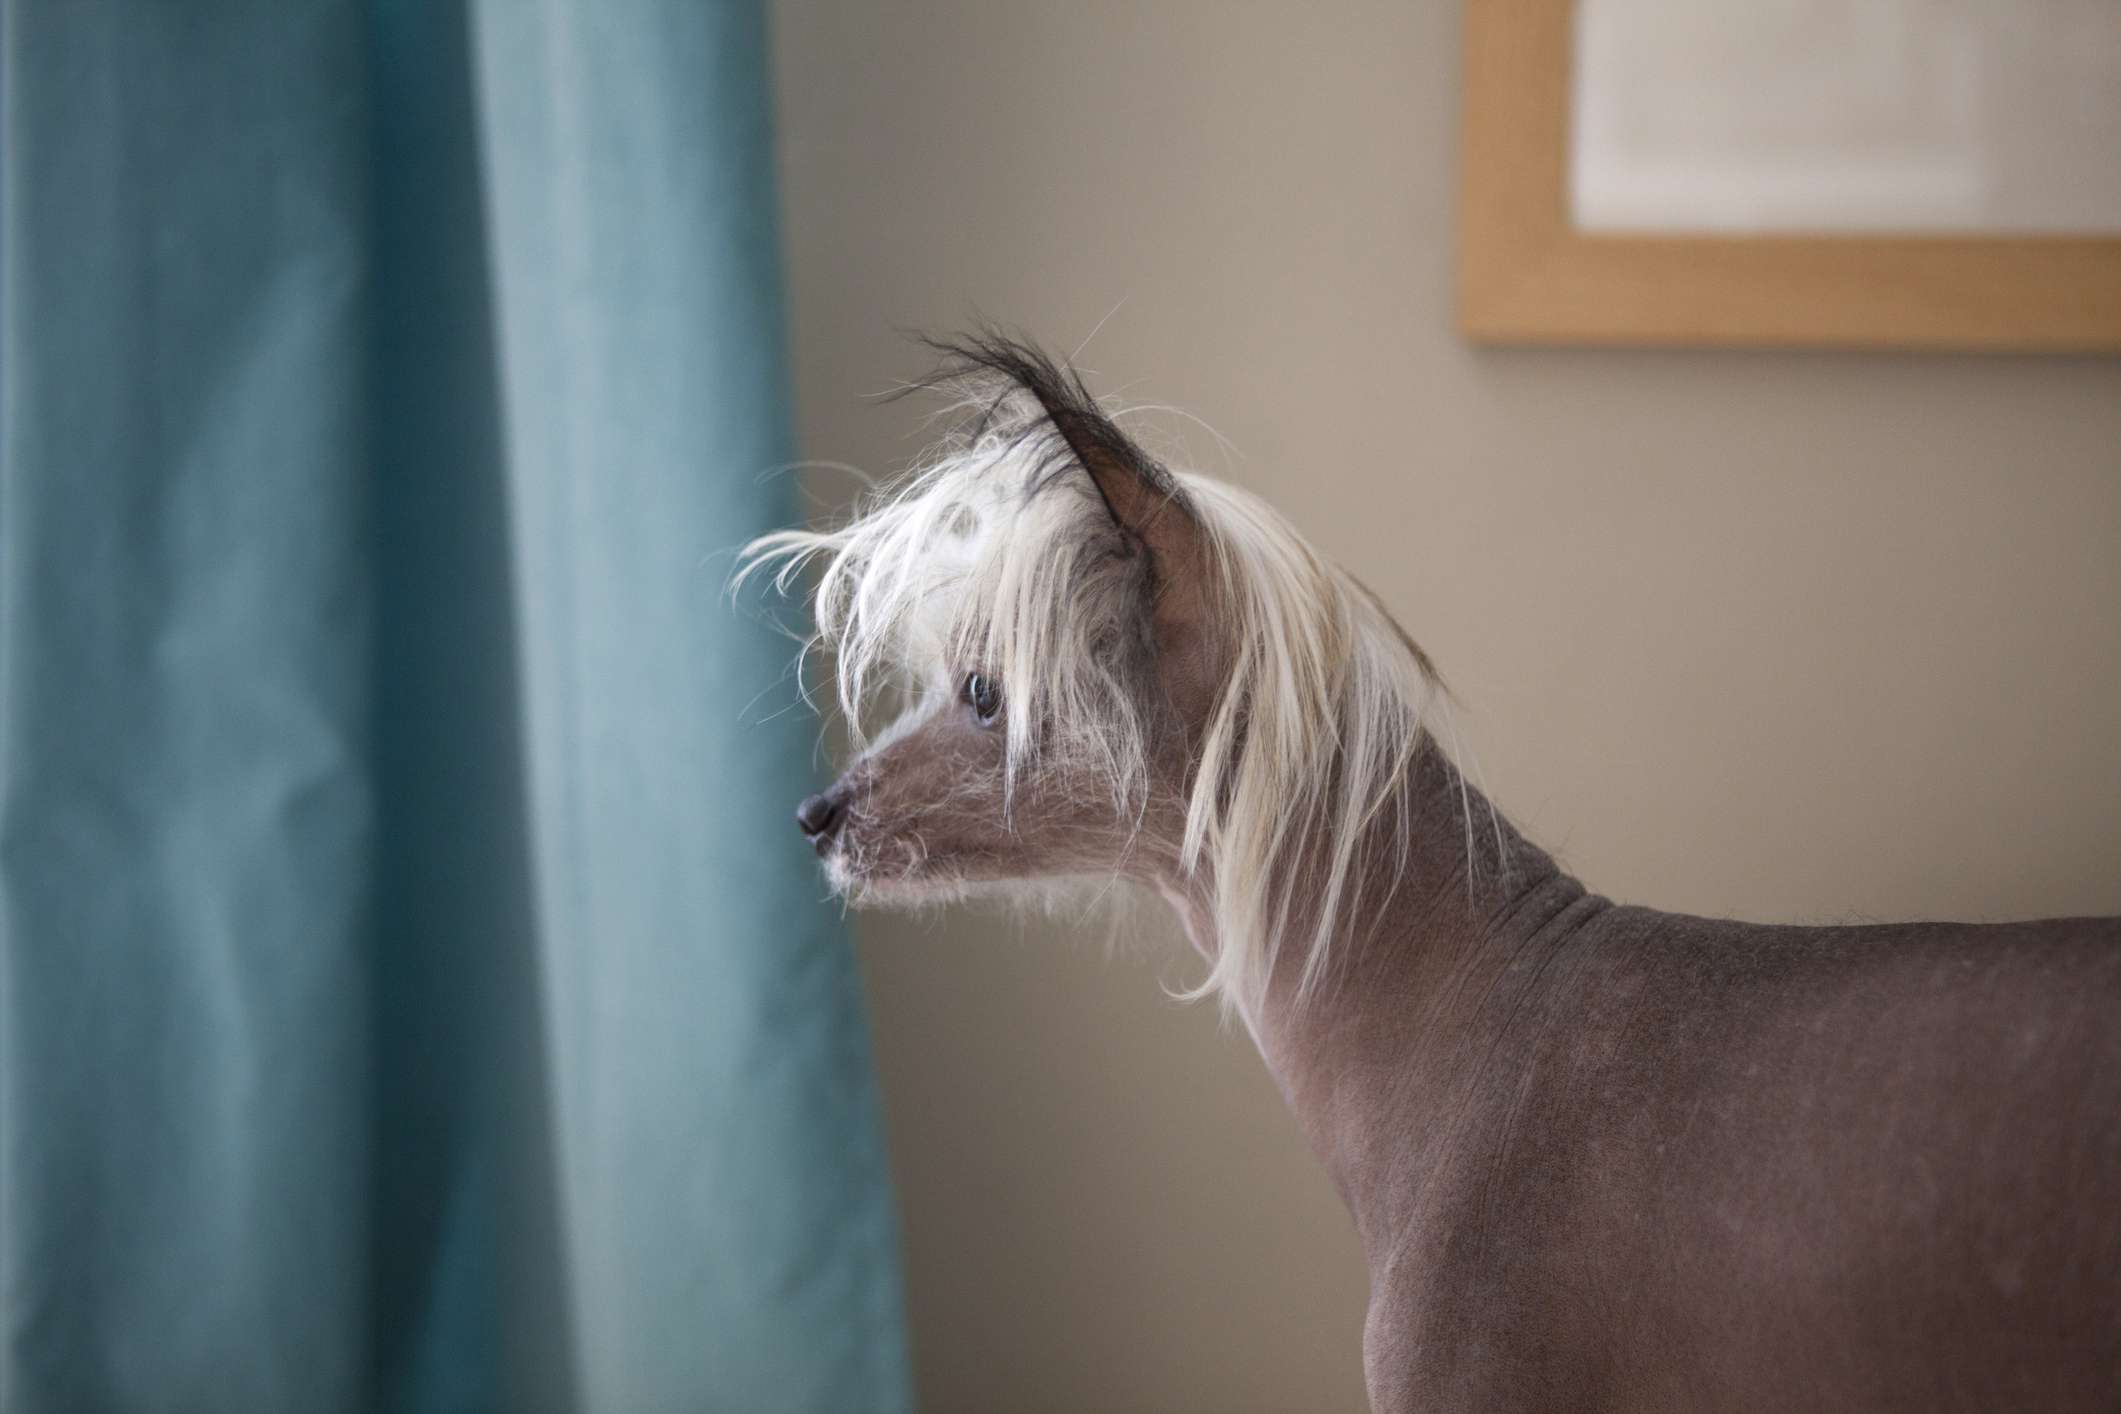 A hairless Chinese Crested with white tufts of hair on its head looking out a window.